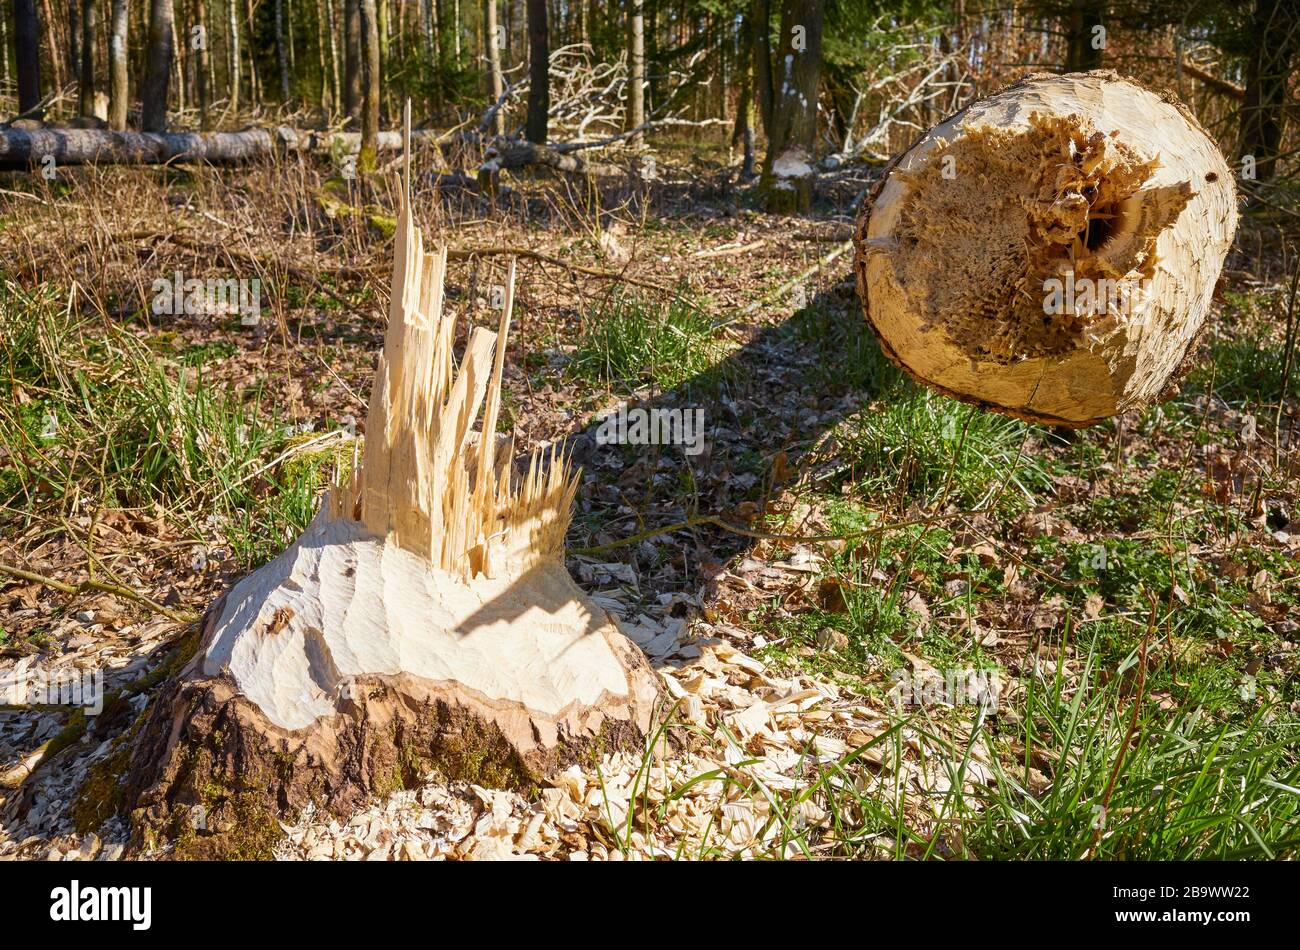 Close up picture of a tree cut down by a beaver with with teeth marks visible, selective focus. Stock Photo